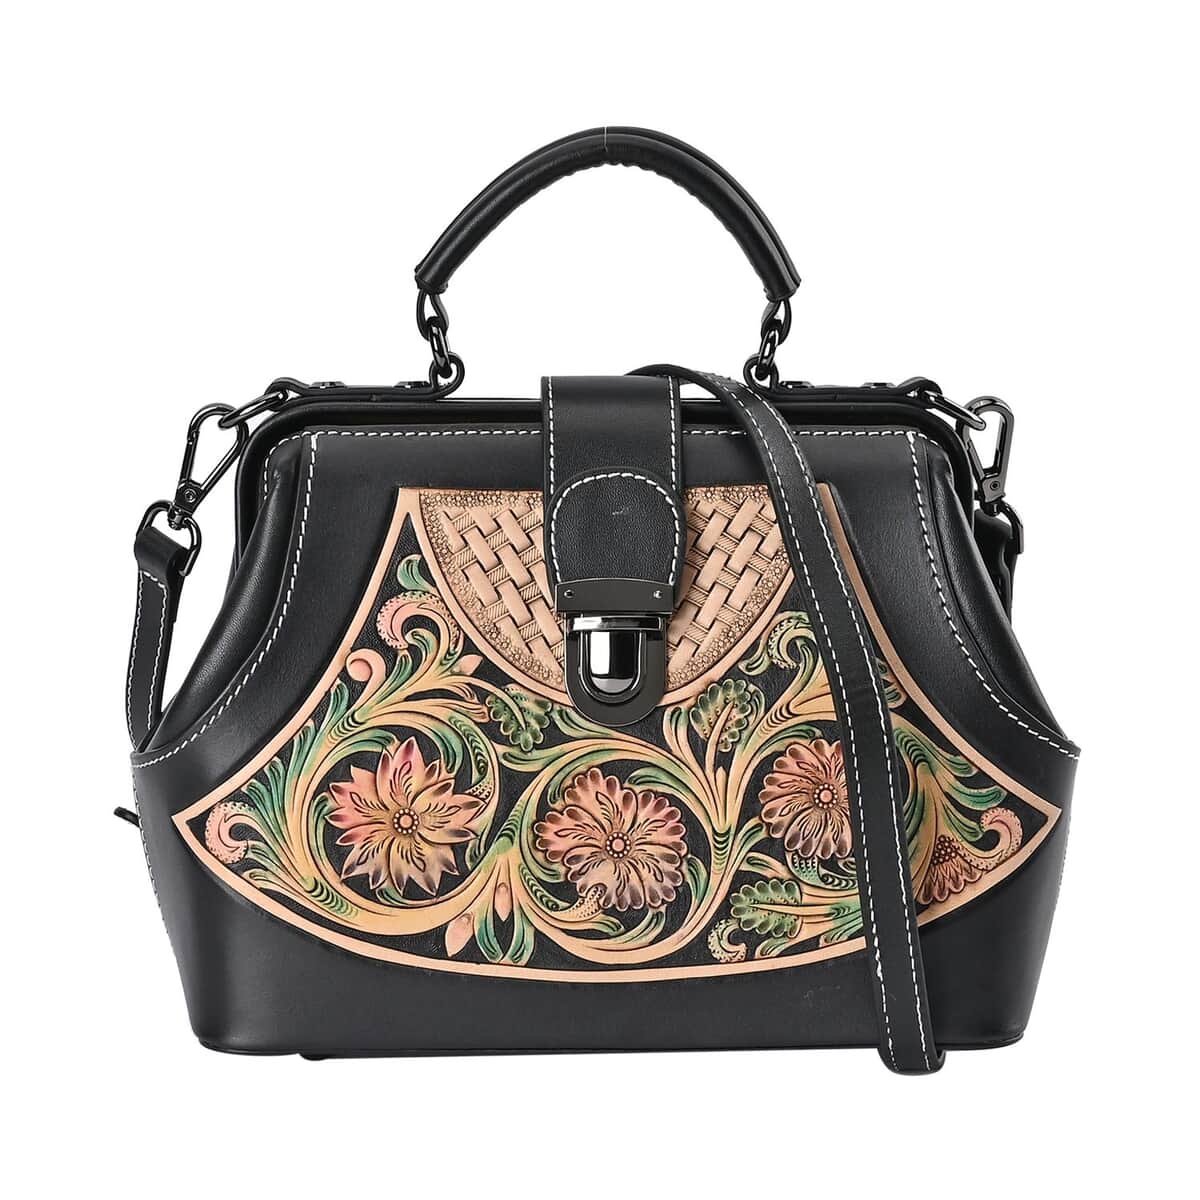 Grand Pelle Black with Multi Color Hand Engraving Flower Pattern Genuine Leather Crossbody Bag (9"x7"x4") image number 0